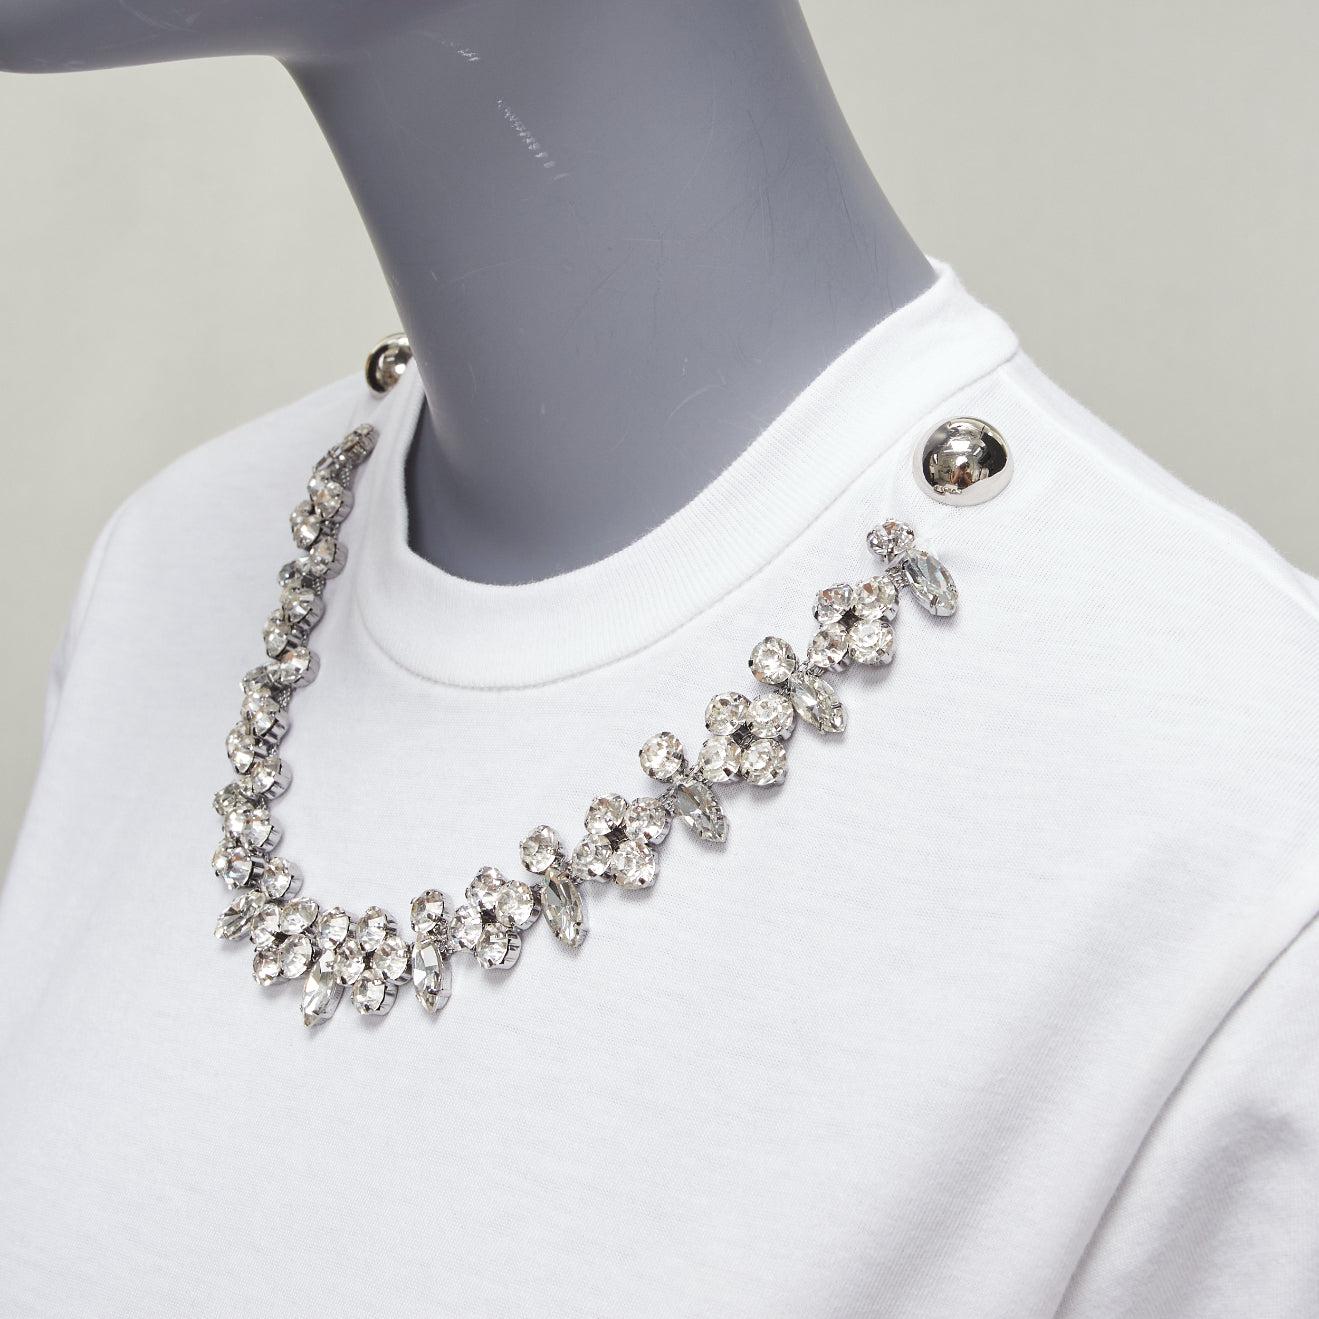 CHRISTOPHER KANE crystal rhinestone dome stud necklace white cotton tshirt XS
Reference: AAWC/A00750
Brand: Christopher Kane
Material: Cotton
Color: White, Silver
Pattern: Solid
Closure: Pullover
Lining: Unlined
Extra Details: Logo zip back at